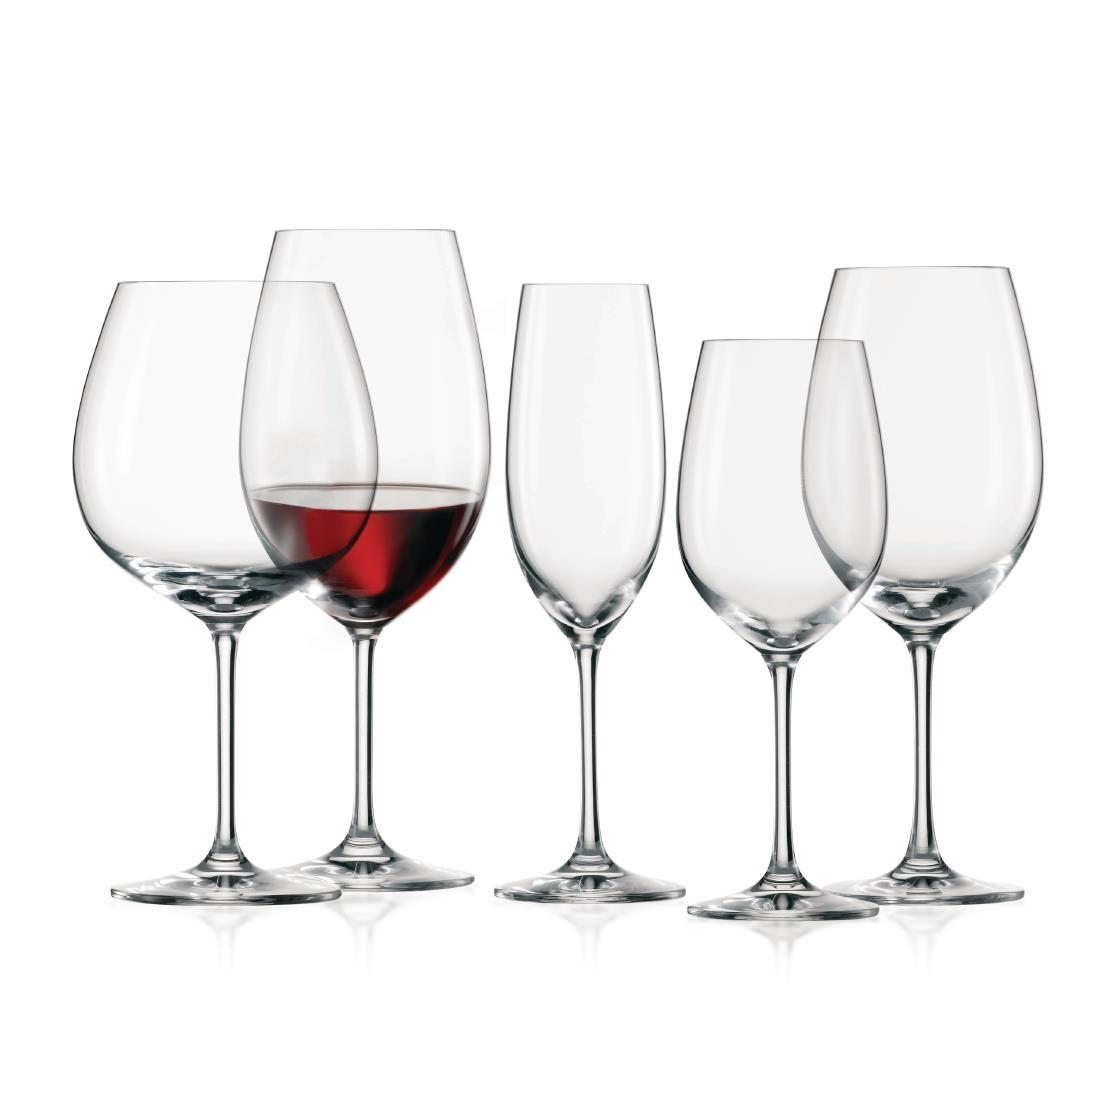 Schott Zwiesel Ivento Red Wine Glasses 480ml (Pack of 6) - GL135  - 3